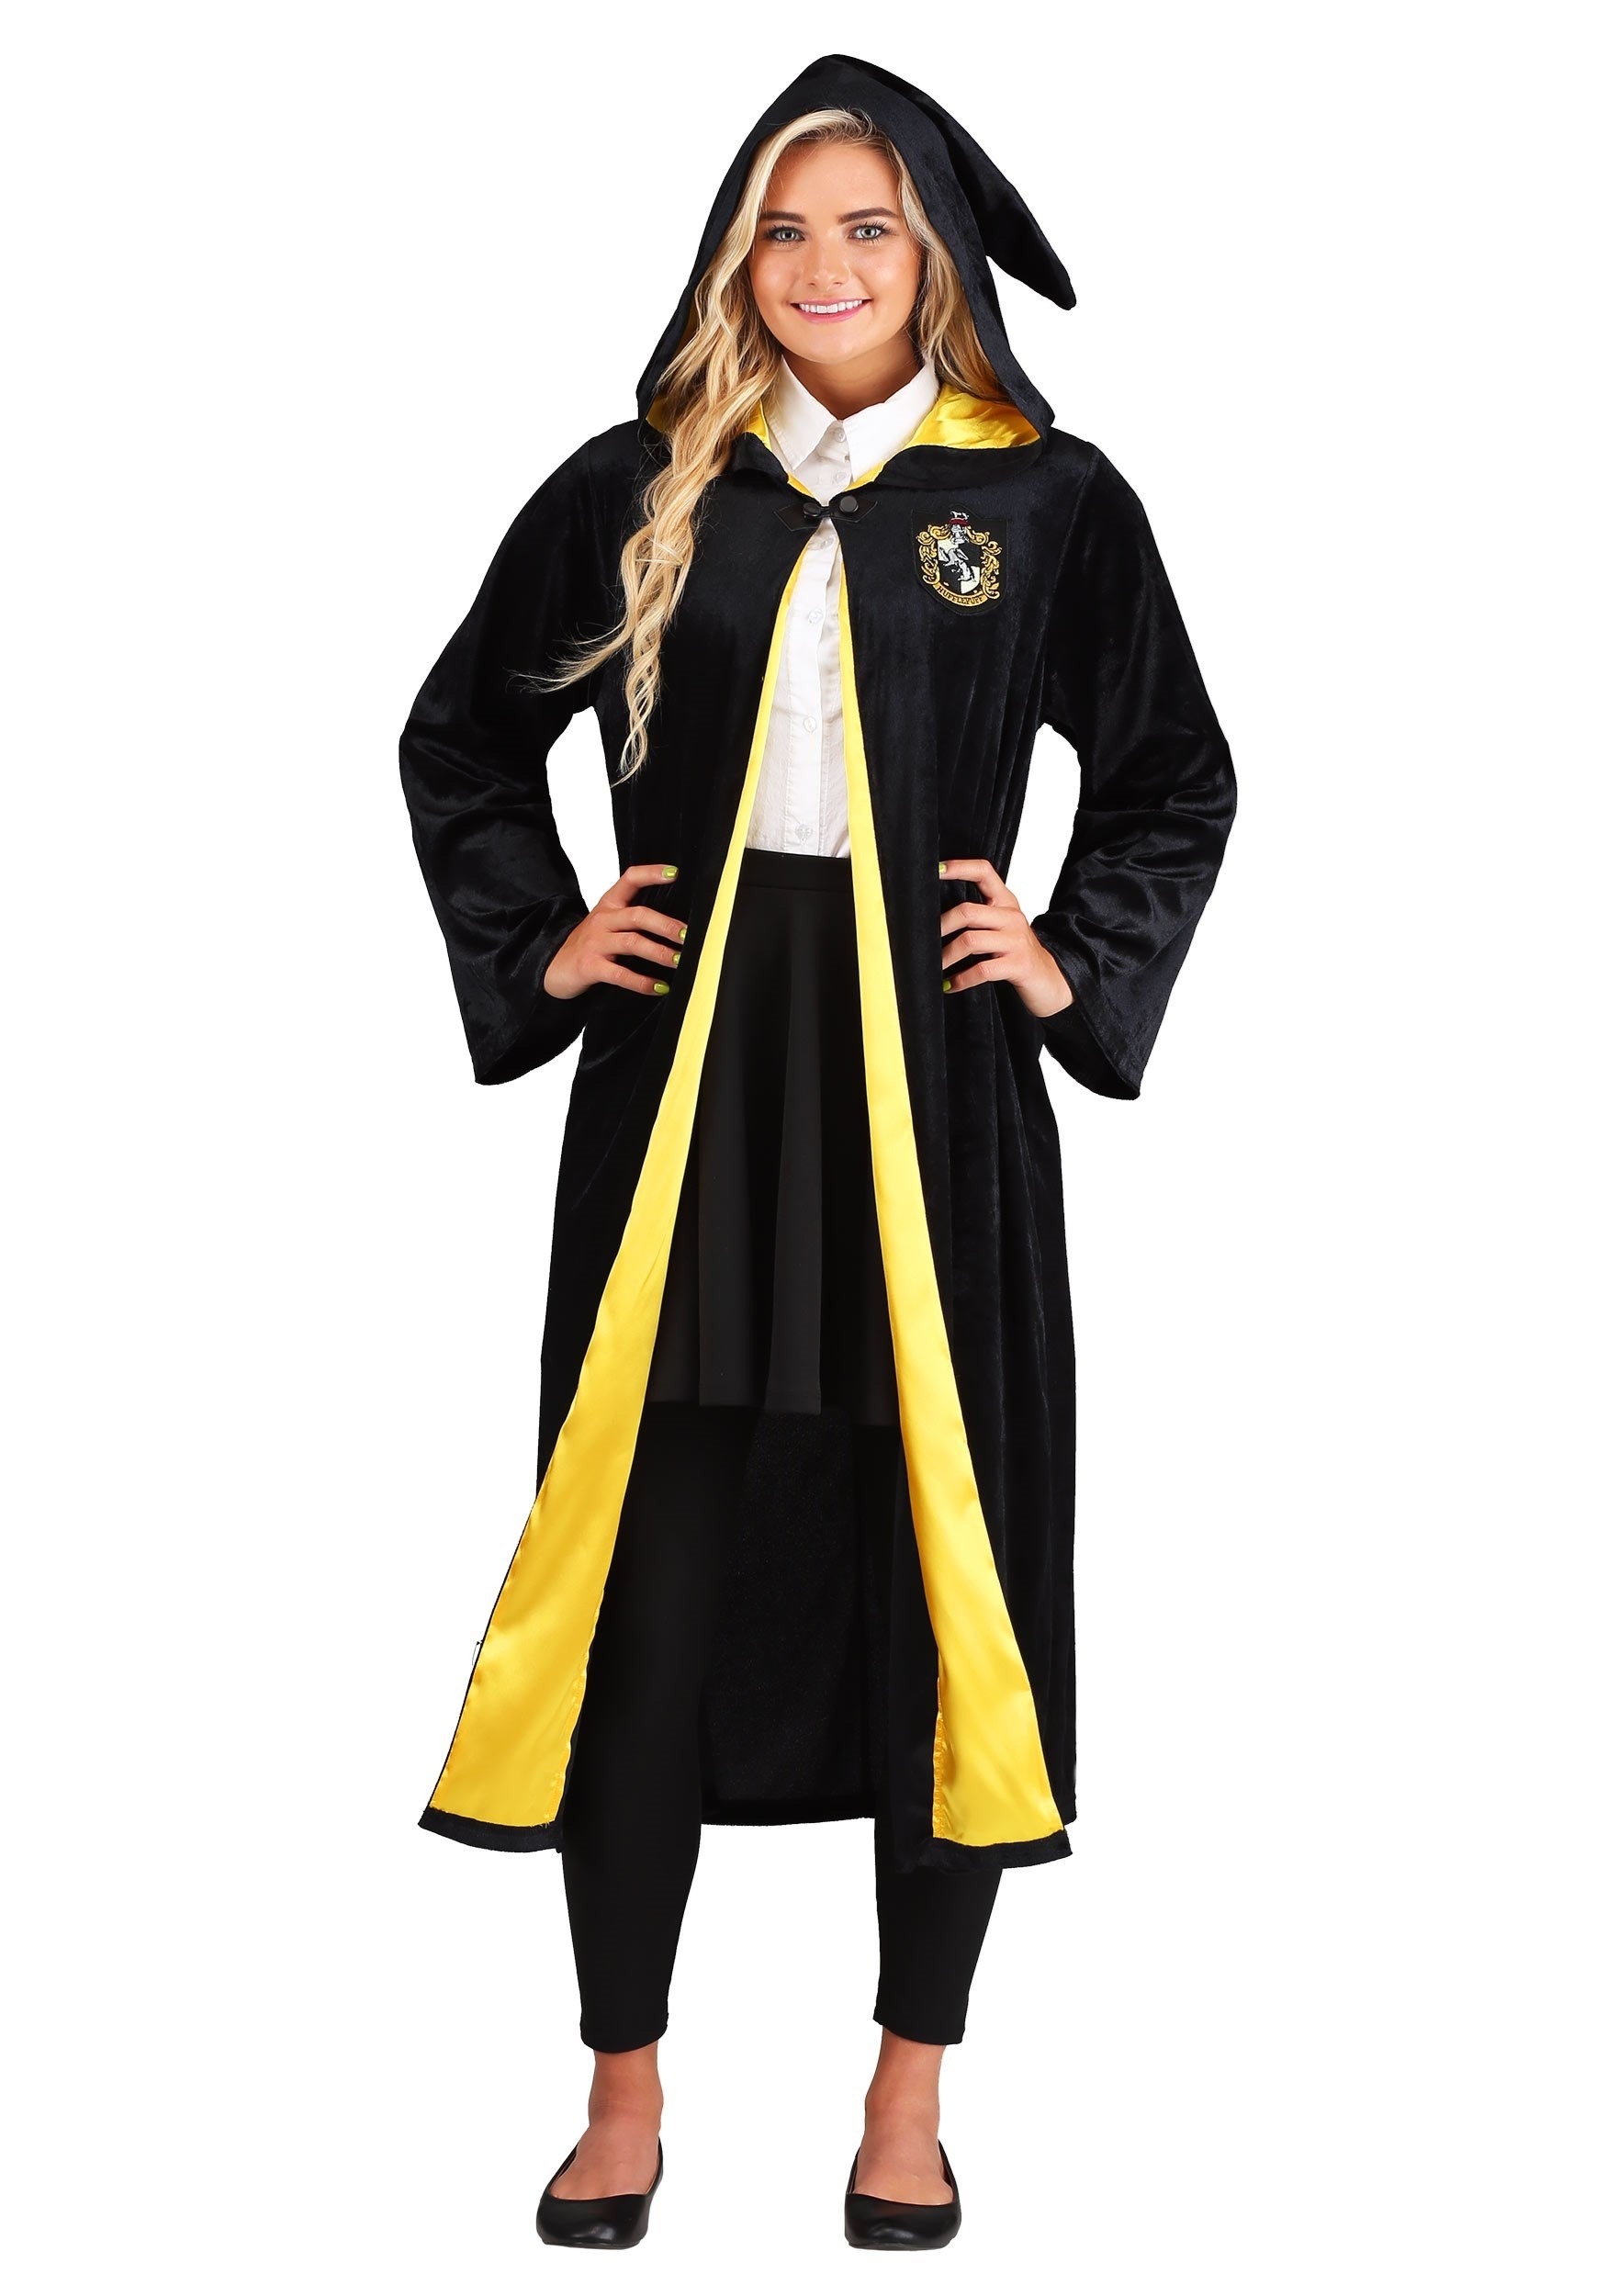 Ravenclaw Robe Deluxe Adult